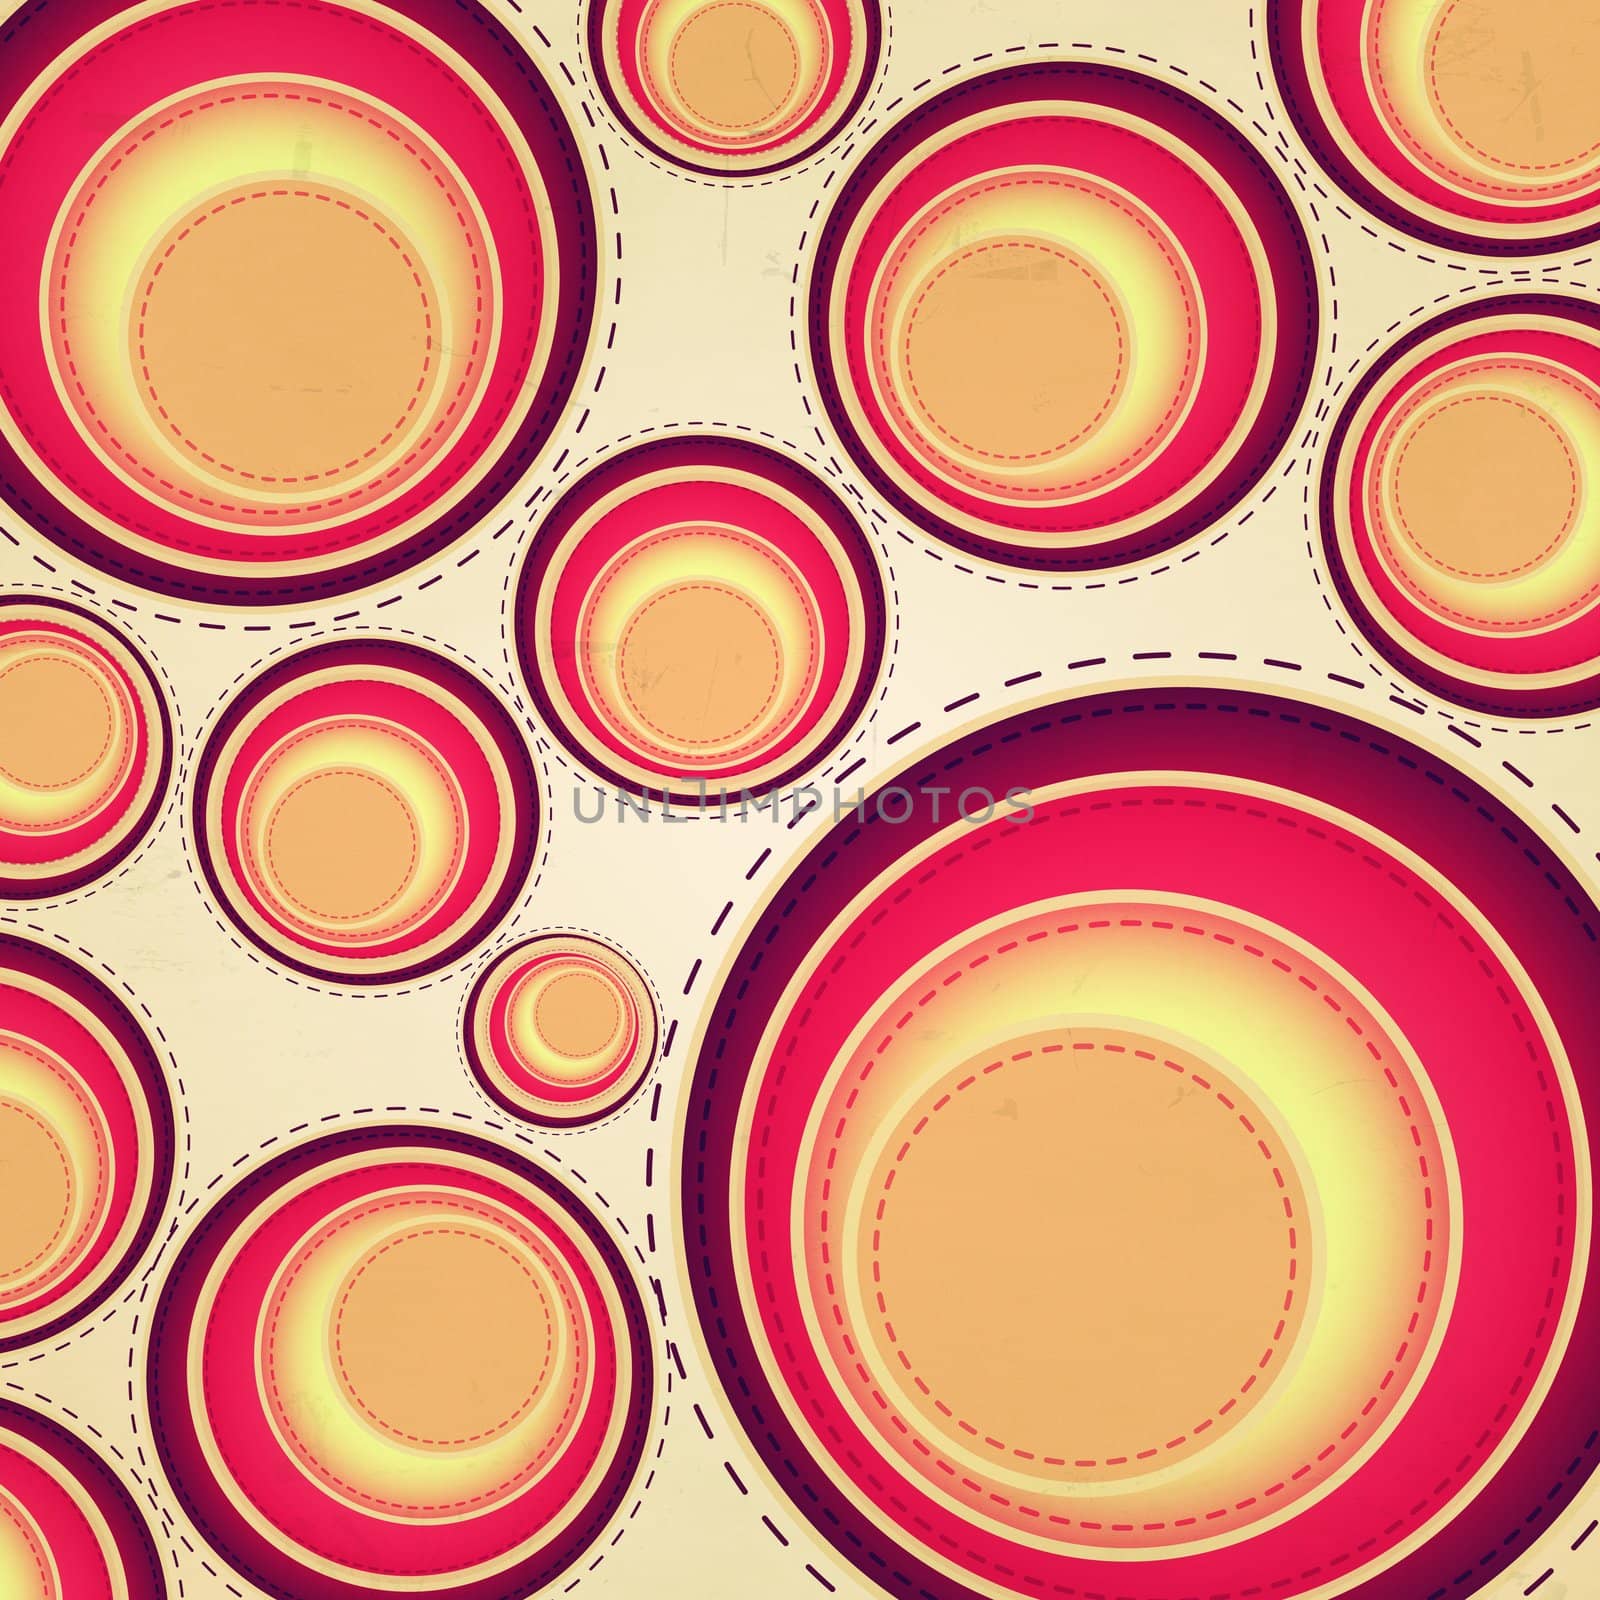 Wallpaper Vintage Abstract background different colorful circles 